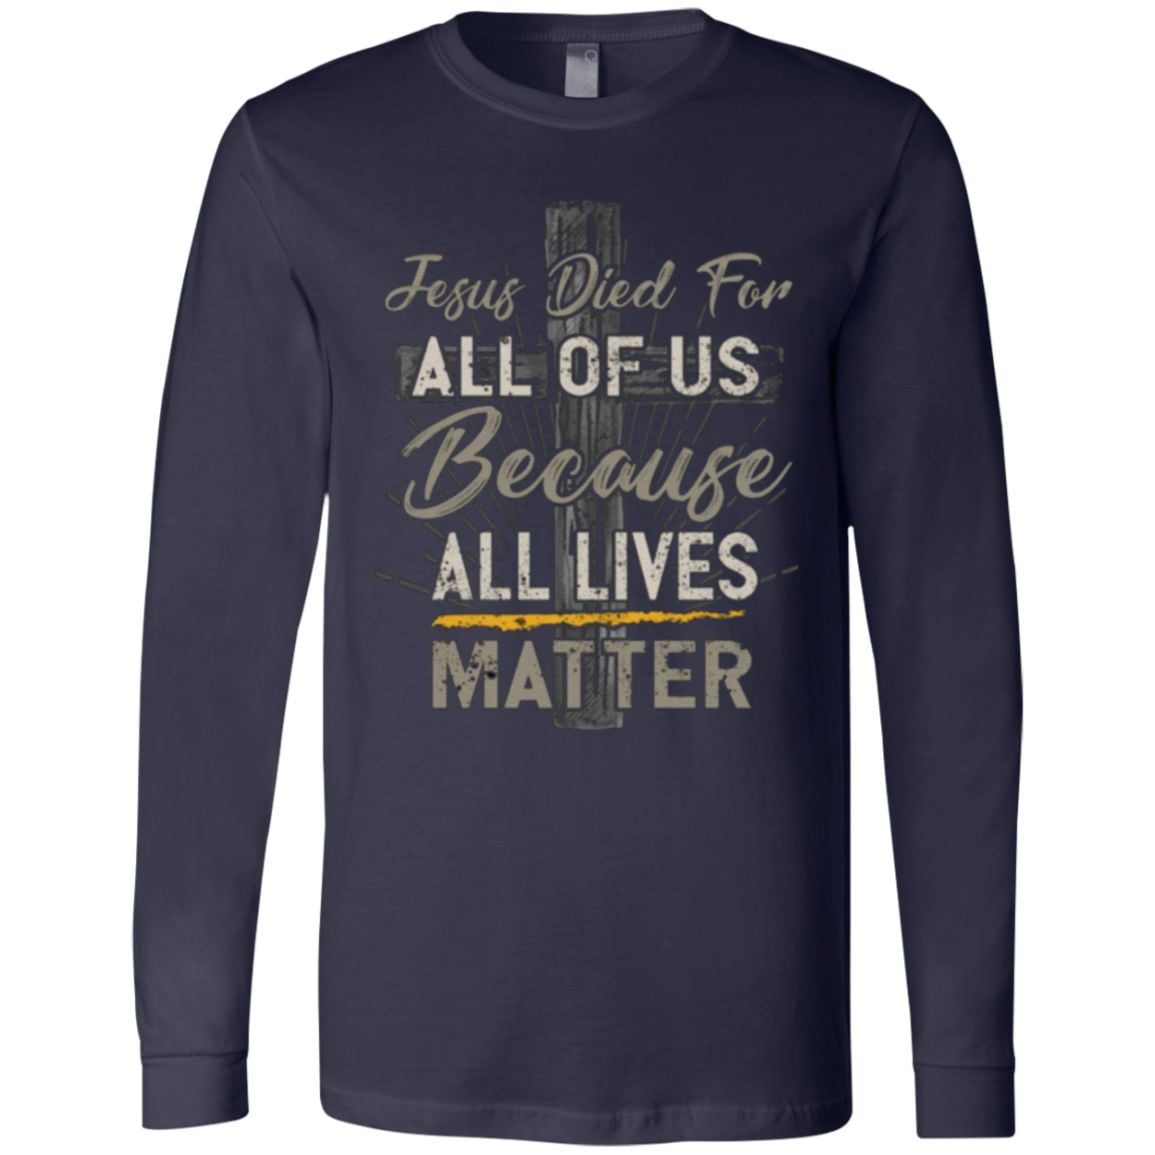 Jesus Died For All Of Us Because All Lives Matter T-Shirt